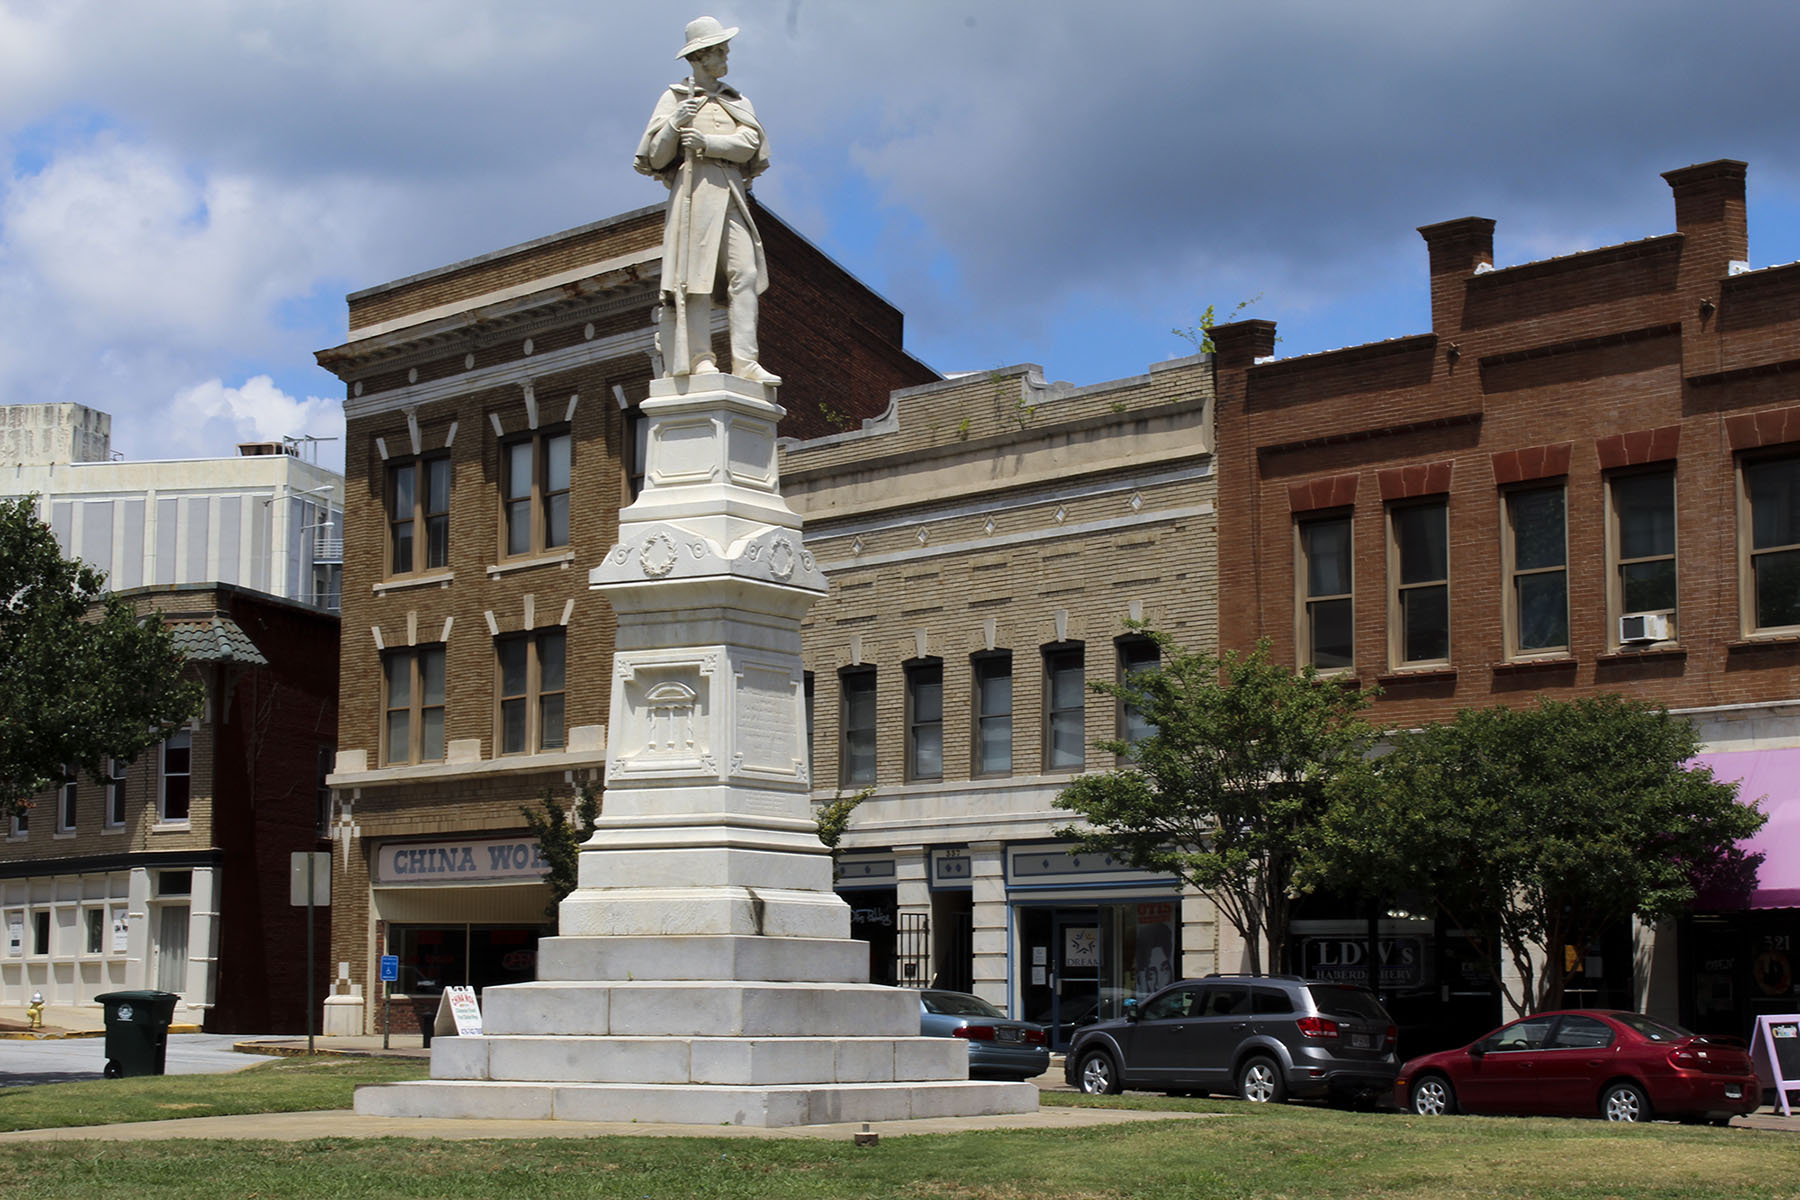 A statue honoring Confederate soldiers has stood at the intersection of Cotton Avenue and Second Street for more than 50 years. Opinions are split regarding whether monuments in the state should be removed - former Macon Mayor C. Jack Ellis wants all public Confederate statues removed, while state Rep. Tommie Benton wants the monuments preserved. (Phillip Jackson/News21)